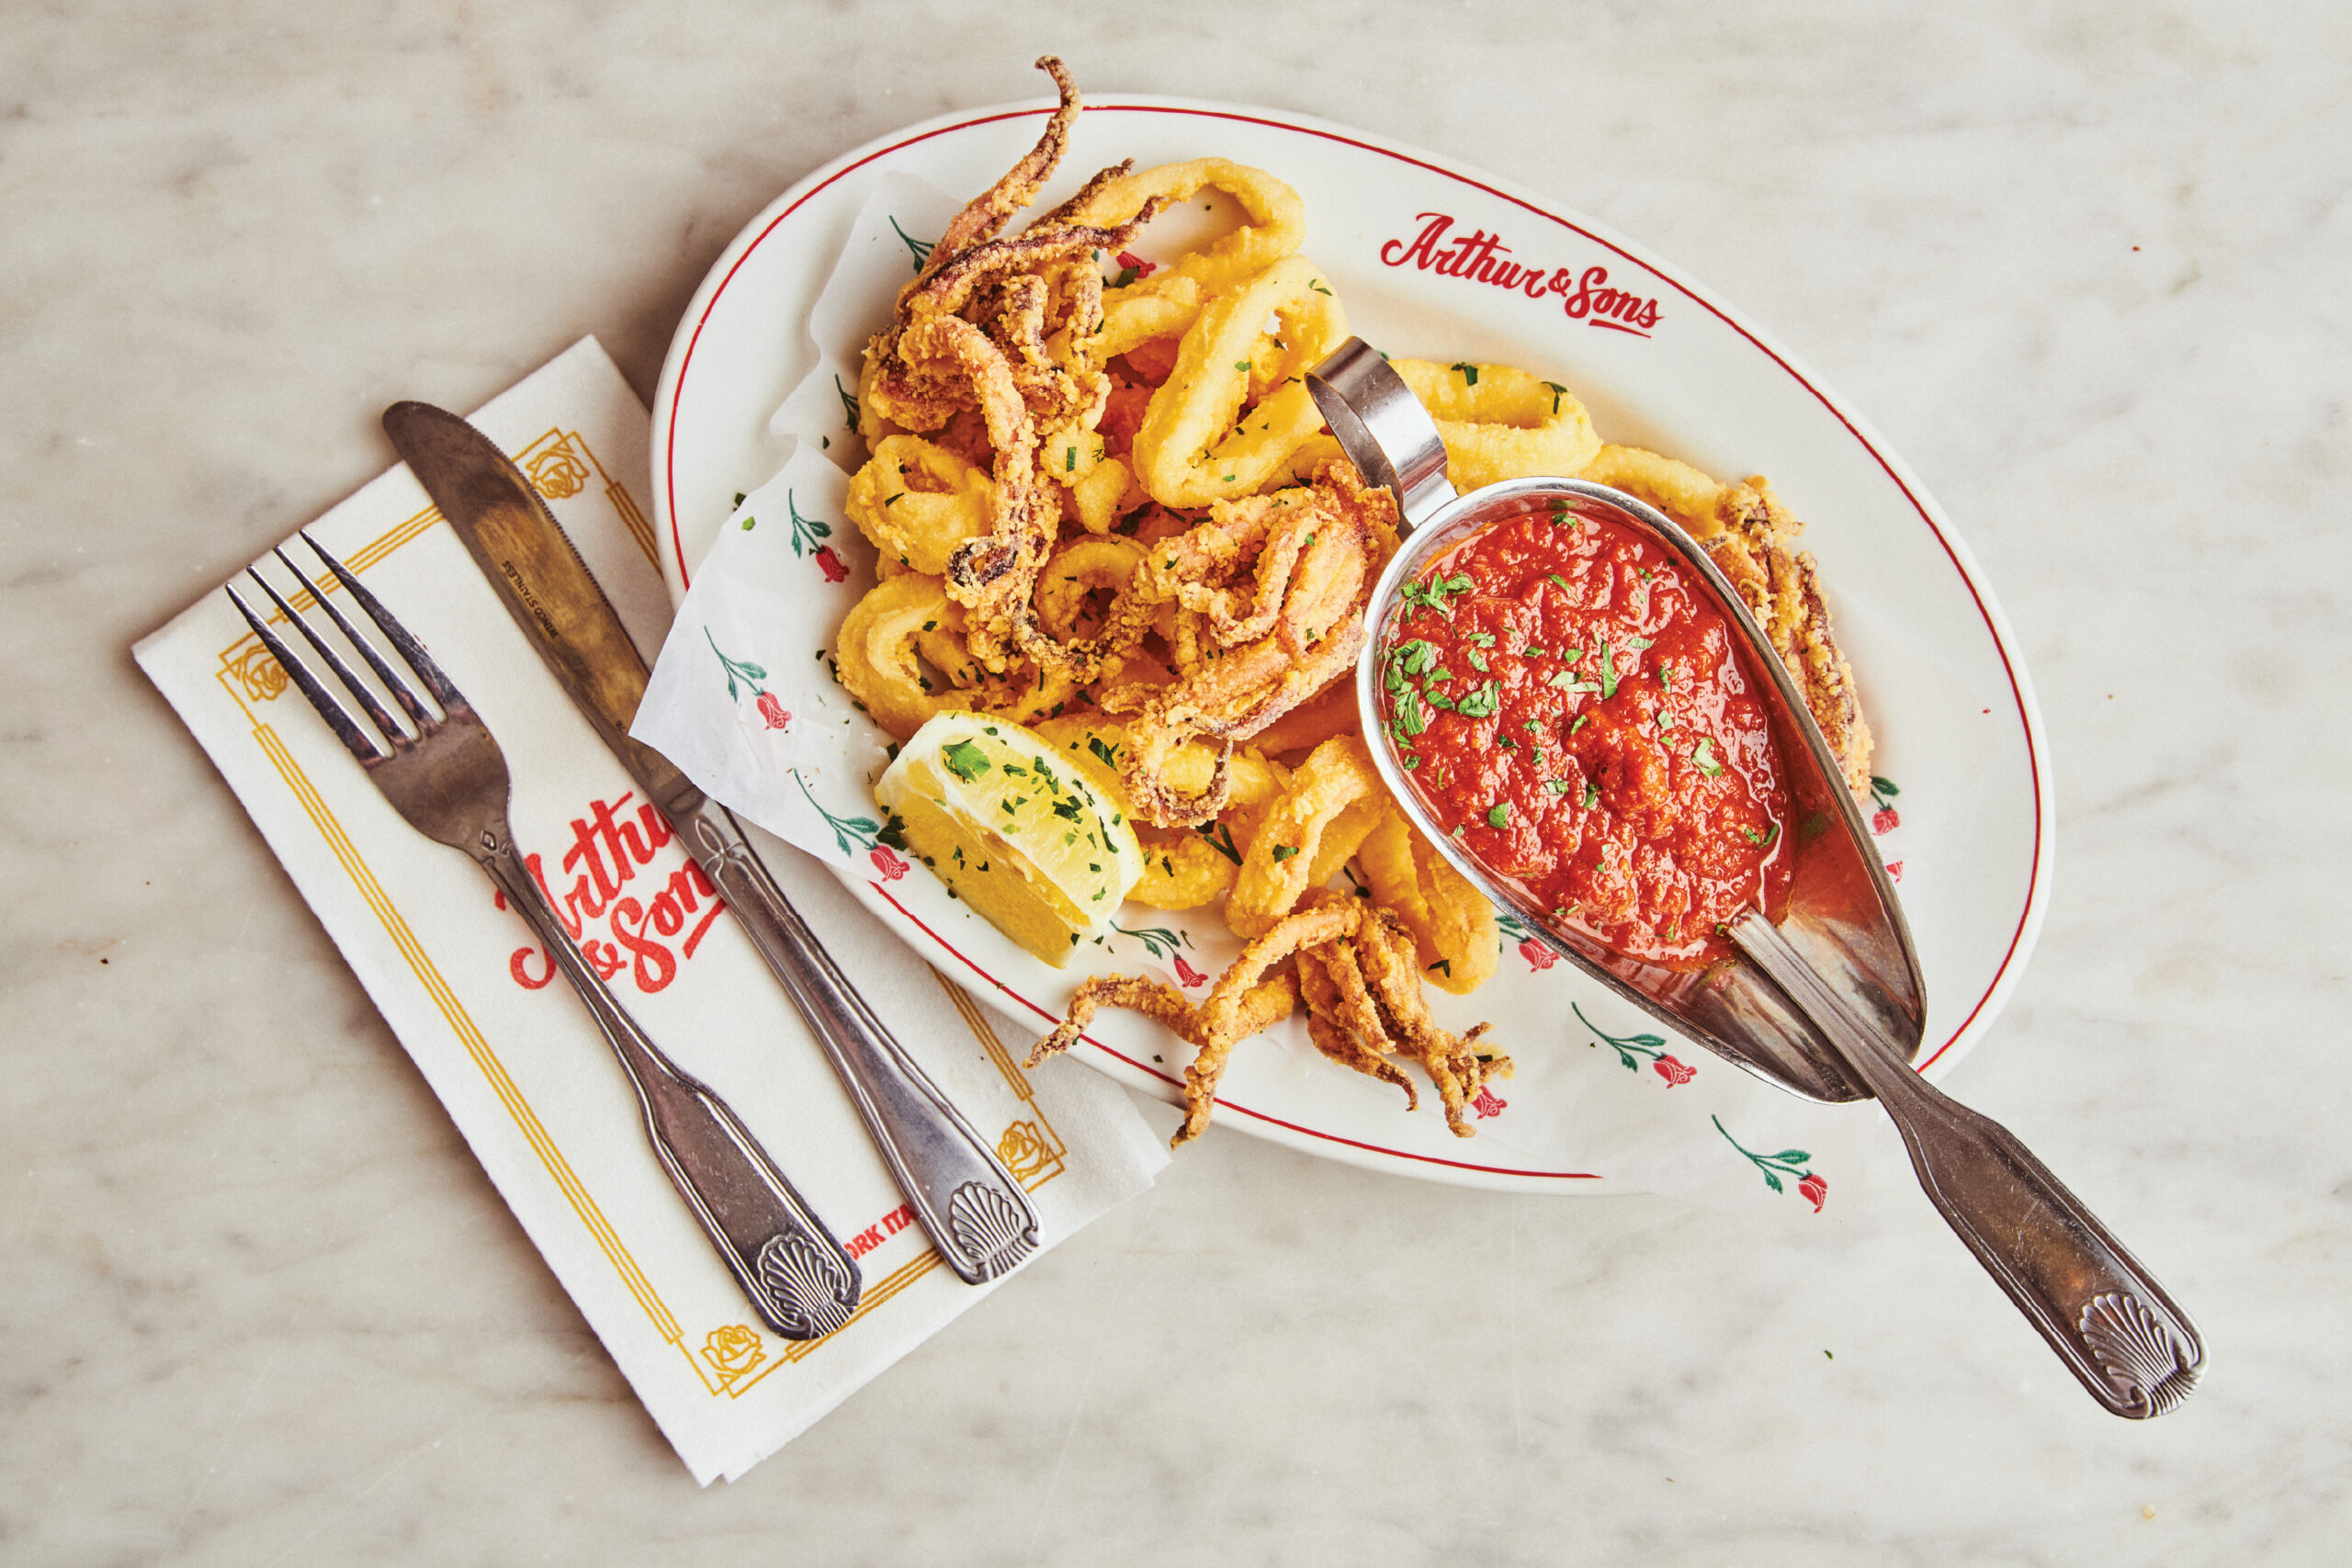 Photo of fried calamari for Arthur & Sons by Madonna+Child Creative Studio